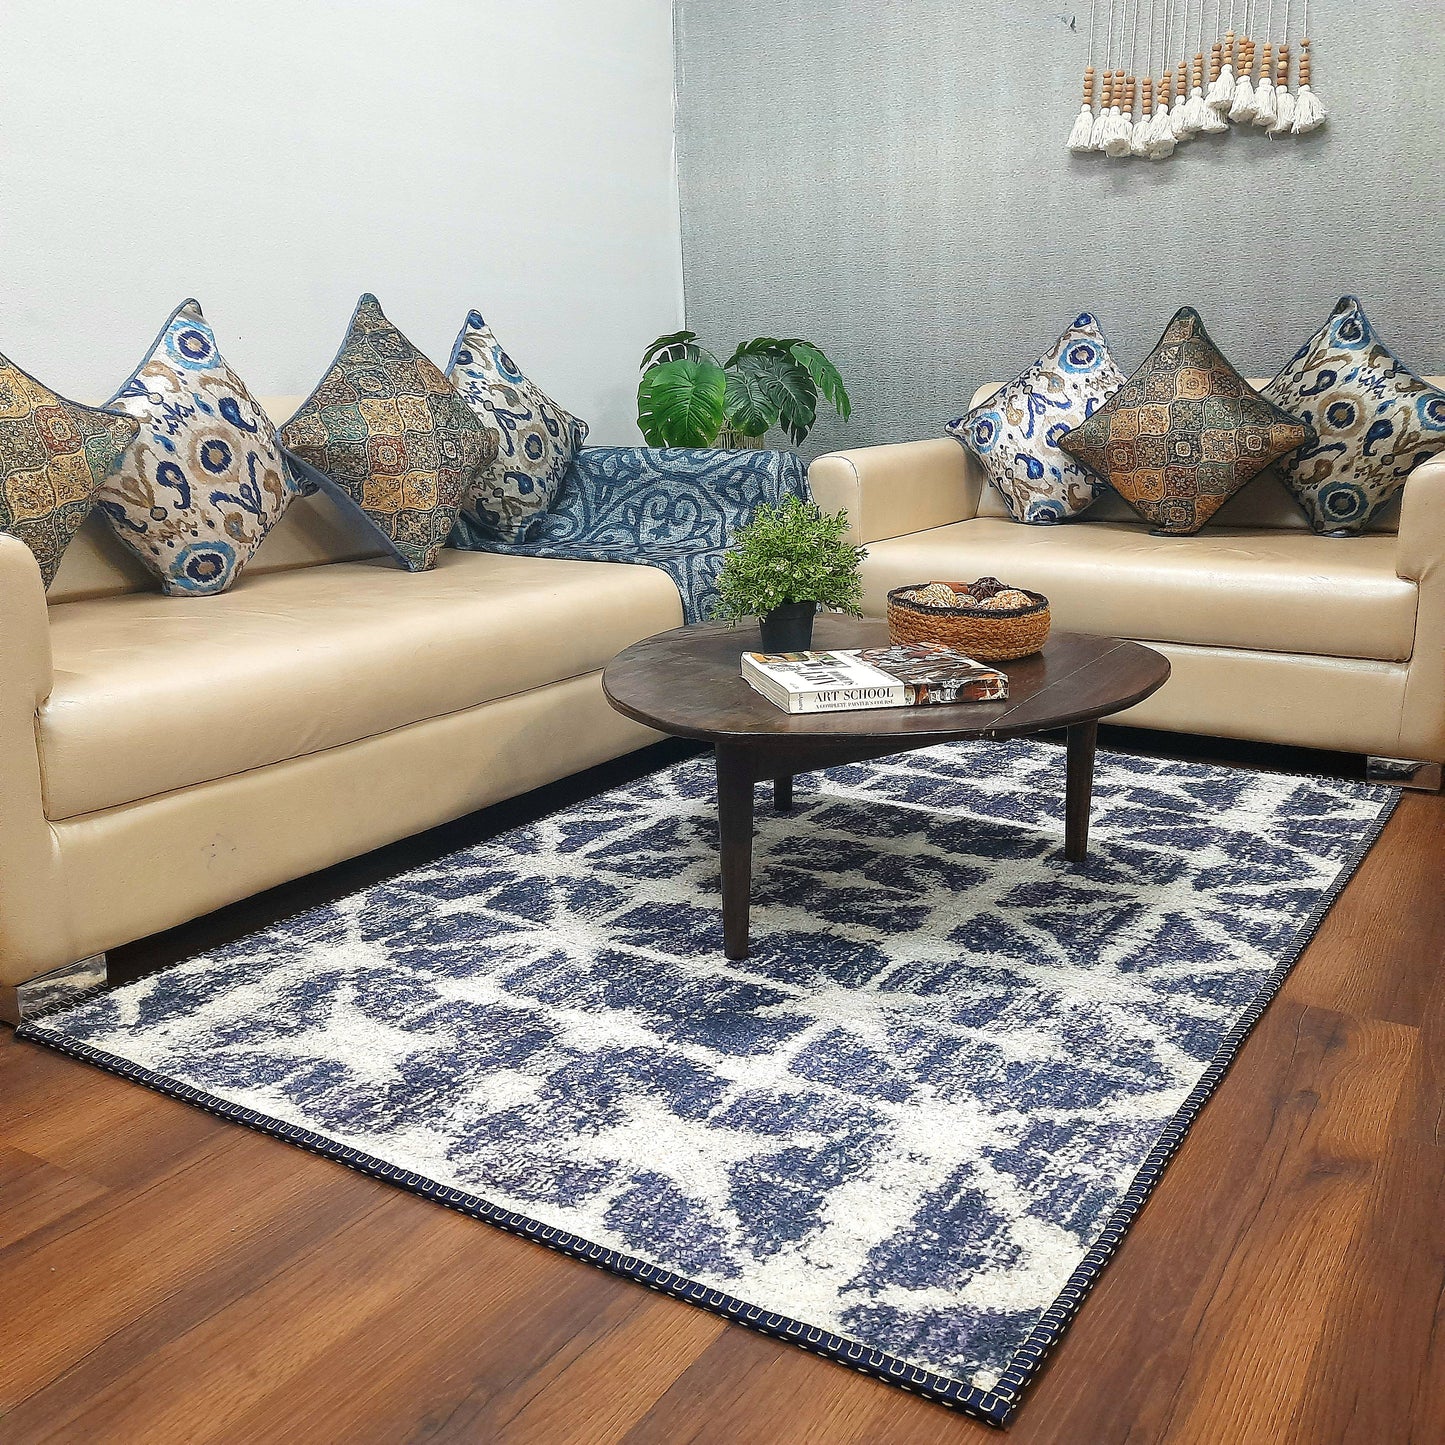 Avioni Faux Silk Carpet for a Stylish and Modern Living Room Vintage theme | Durable and Washable